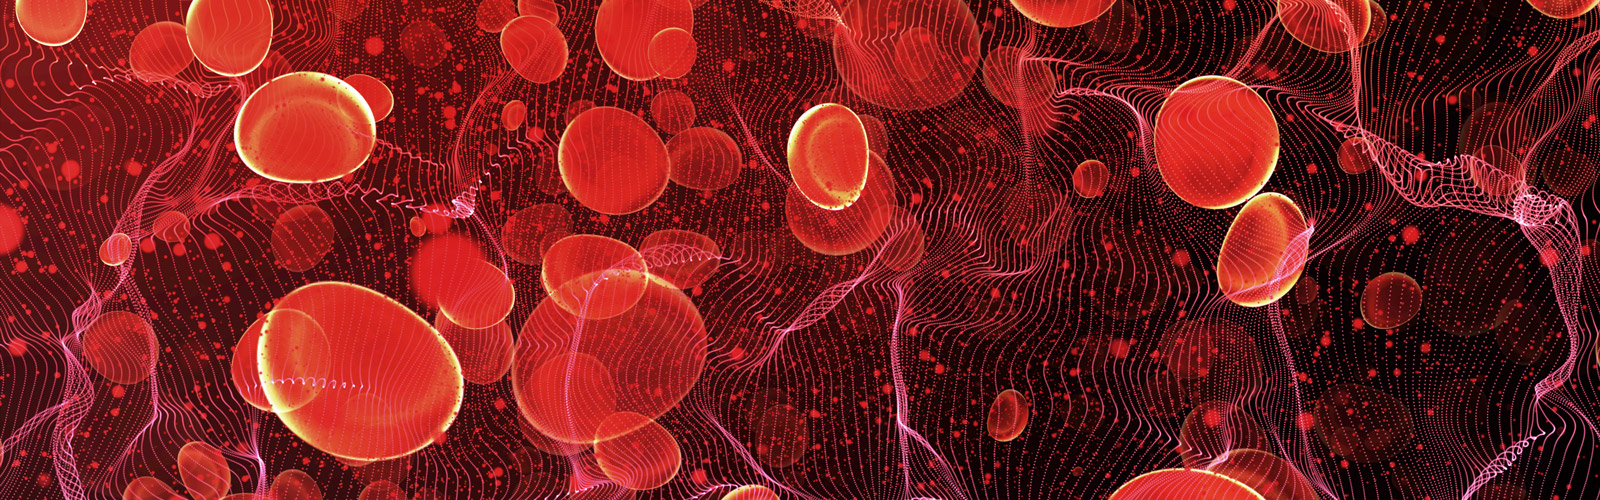 Red blood cells in travel an artery